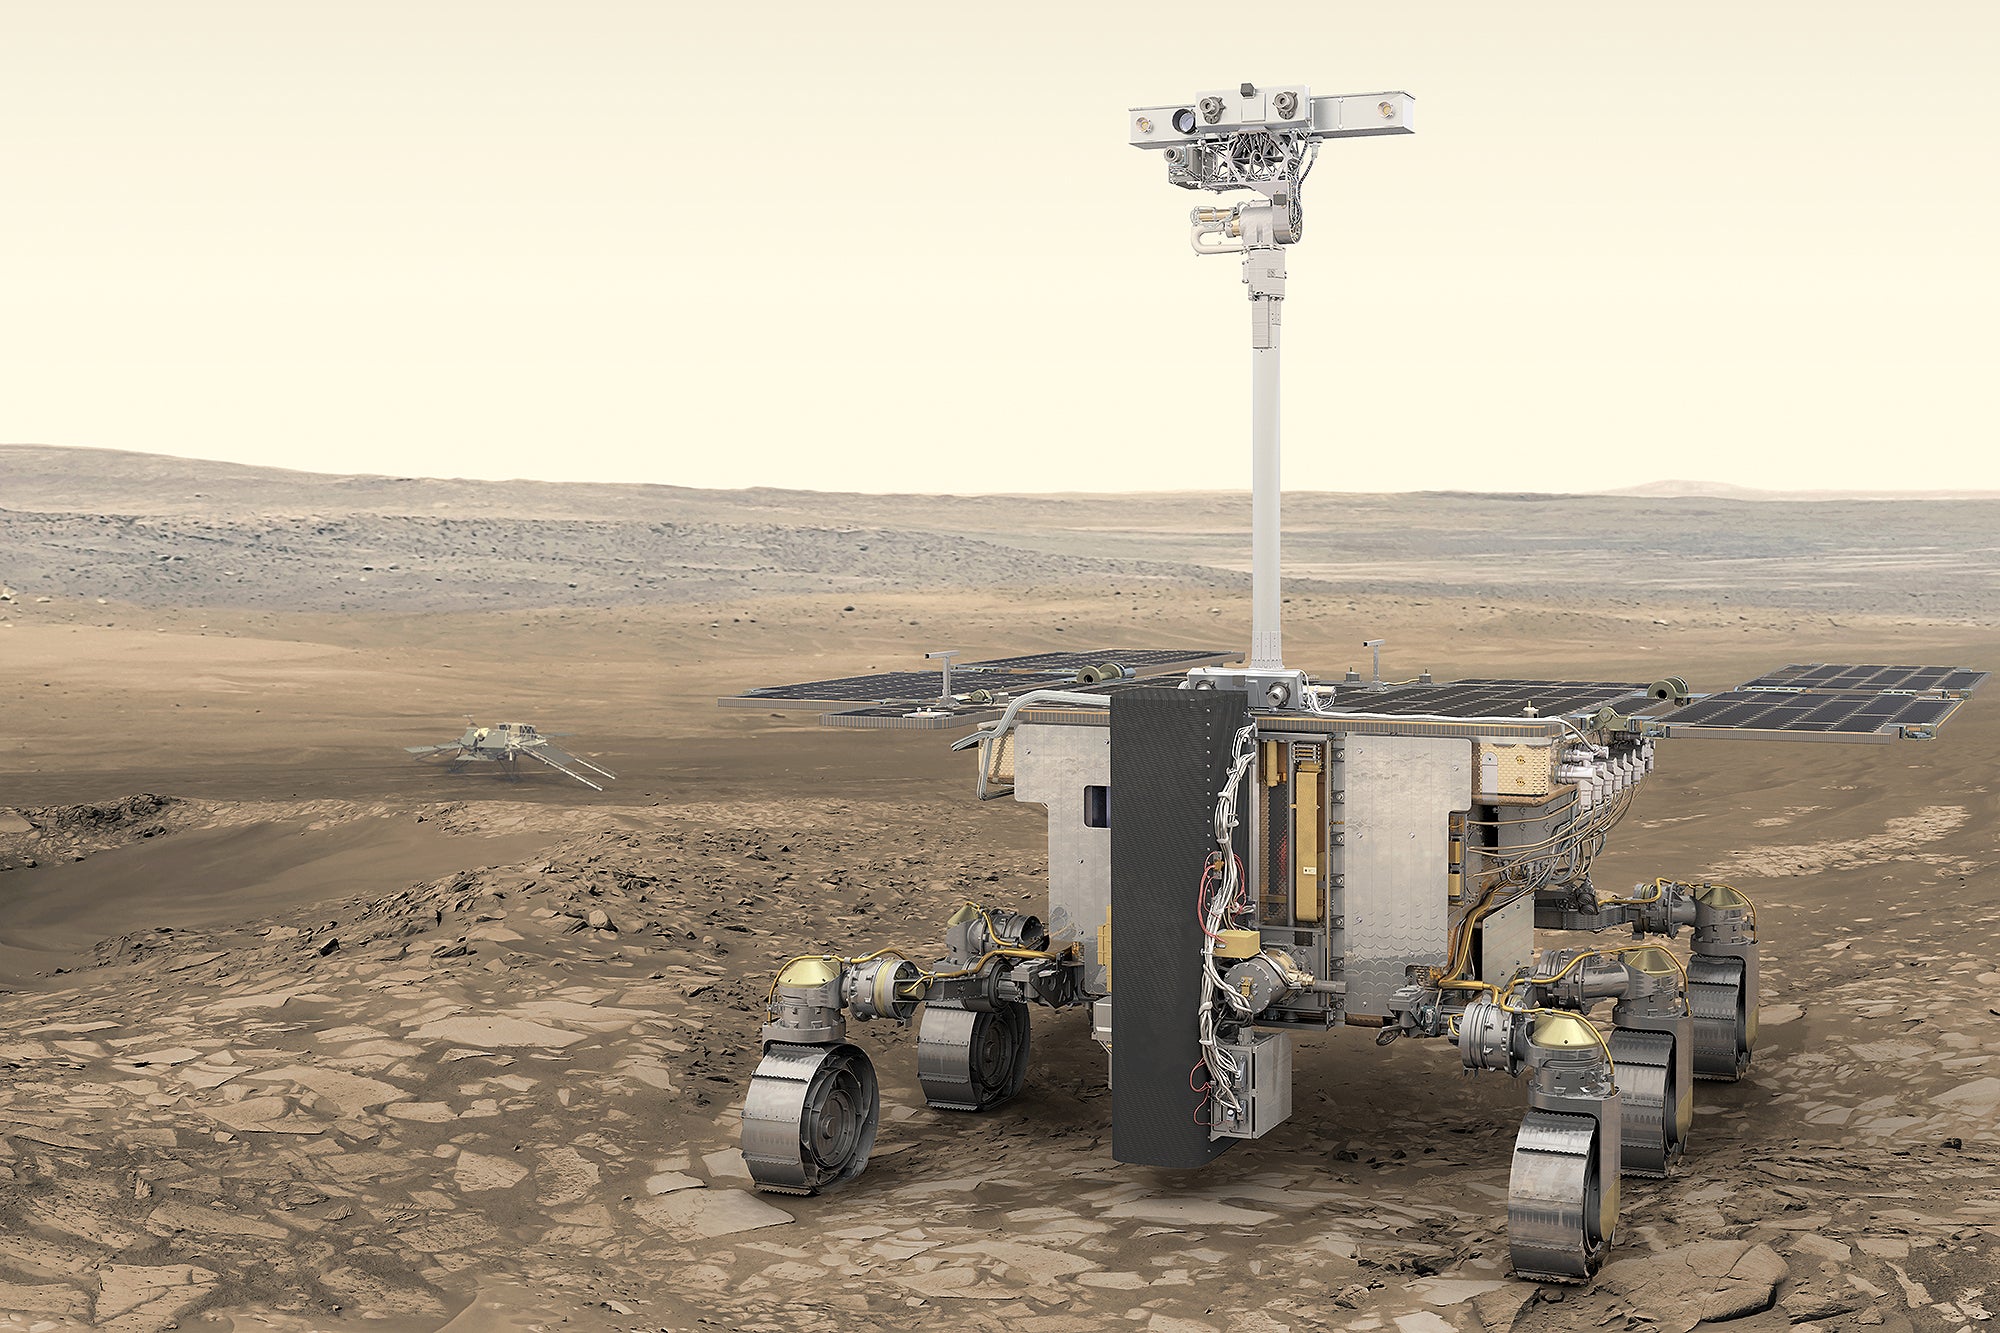 Artist’s impression of ESA’s ExoMars rover (foreground) and Russia’s science platform (background) on Mars.